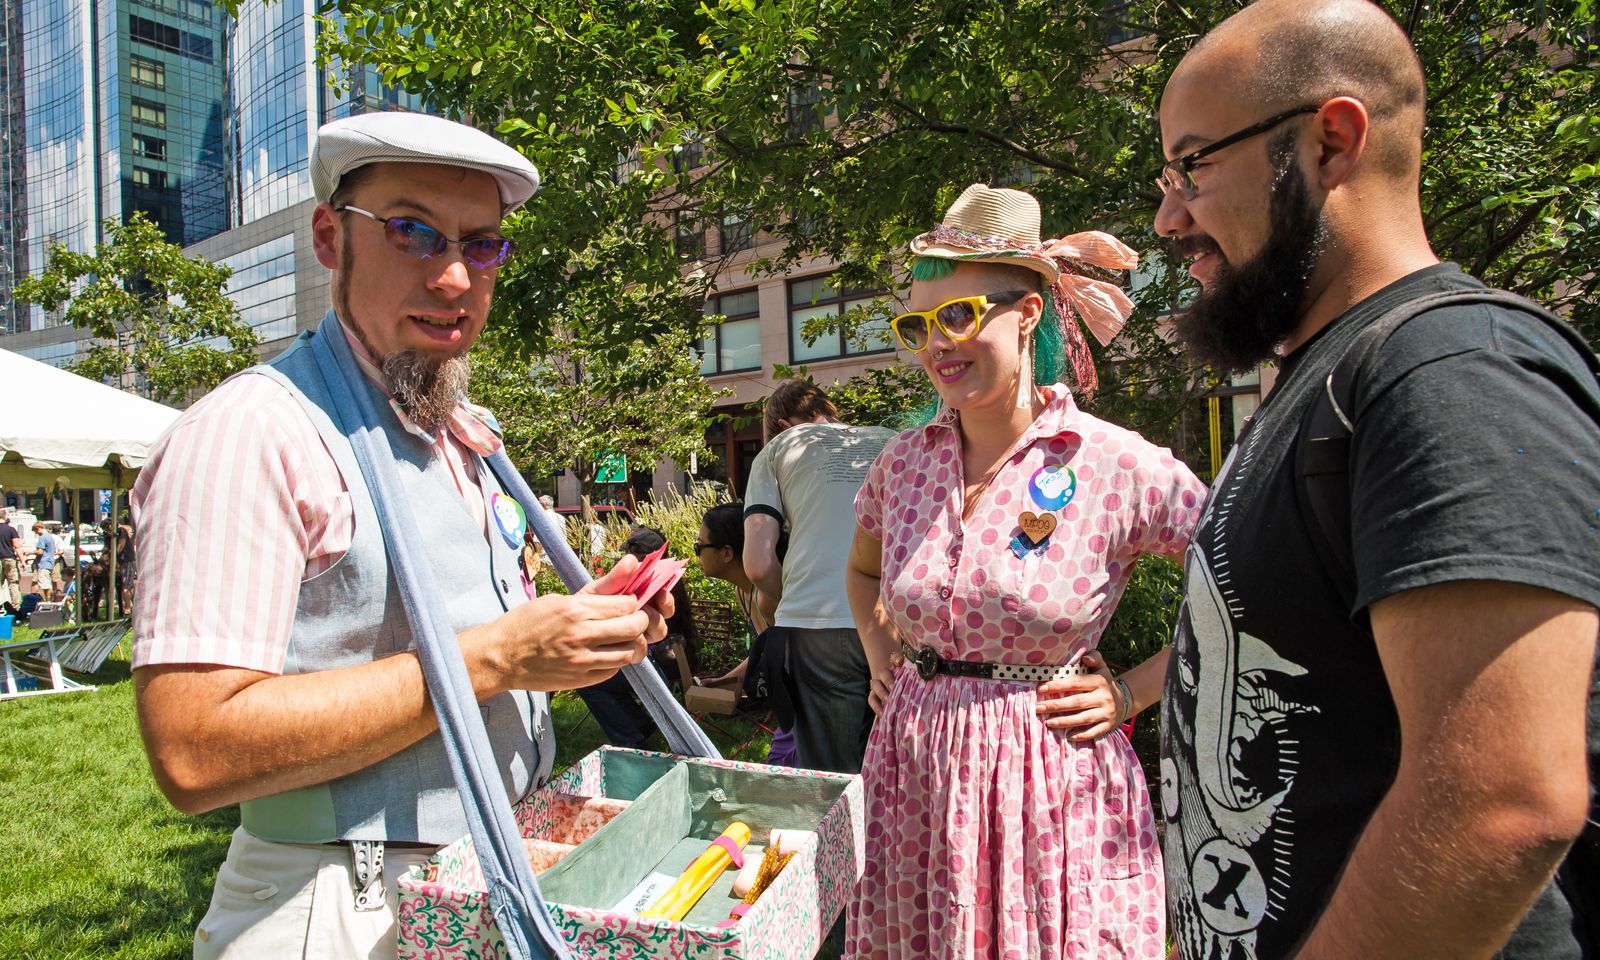 Myself and fellow Quest Peddler handing out quest cards at Figment Boston, MA in 2013